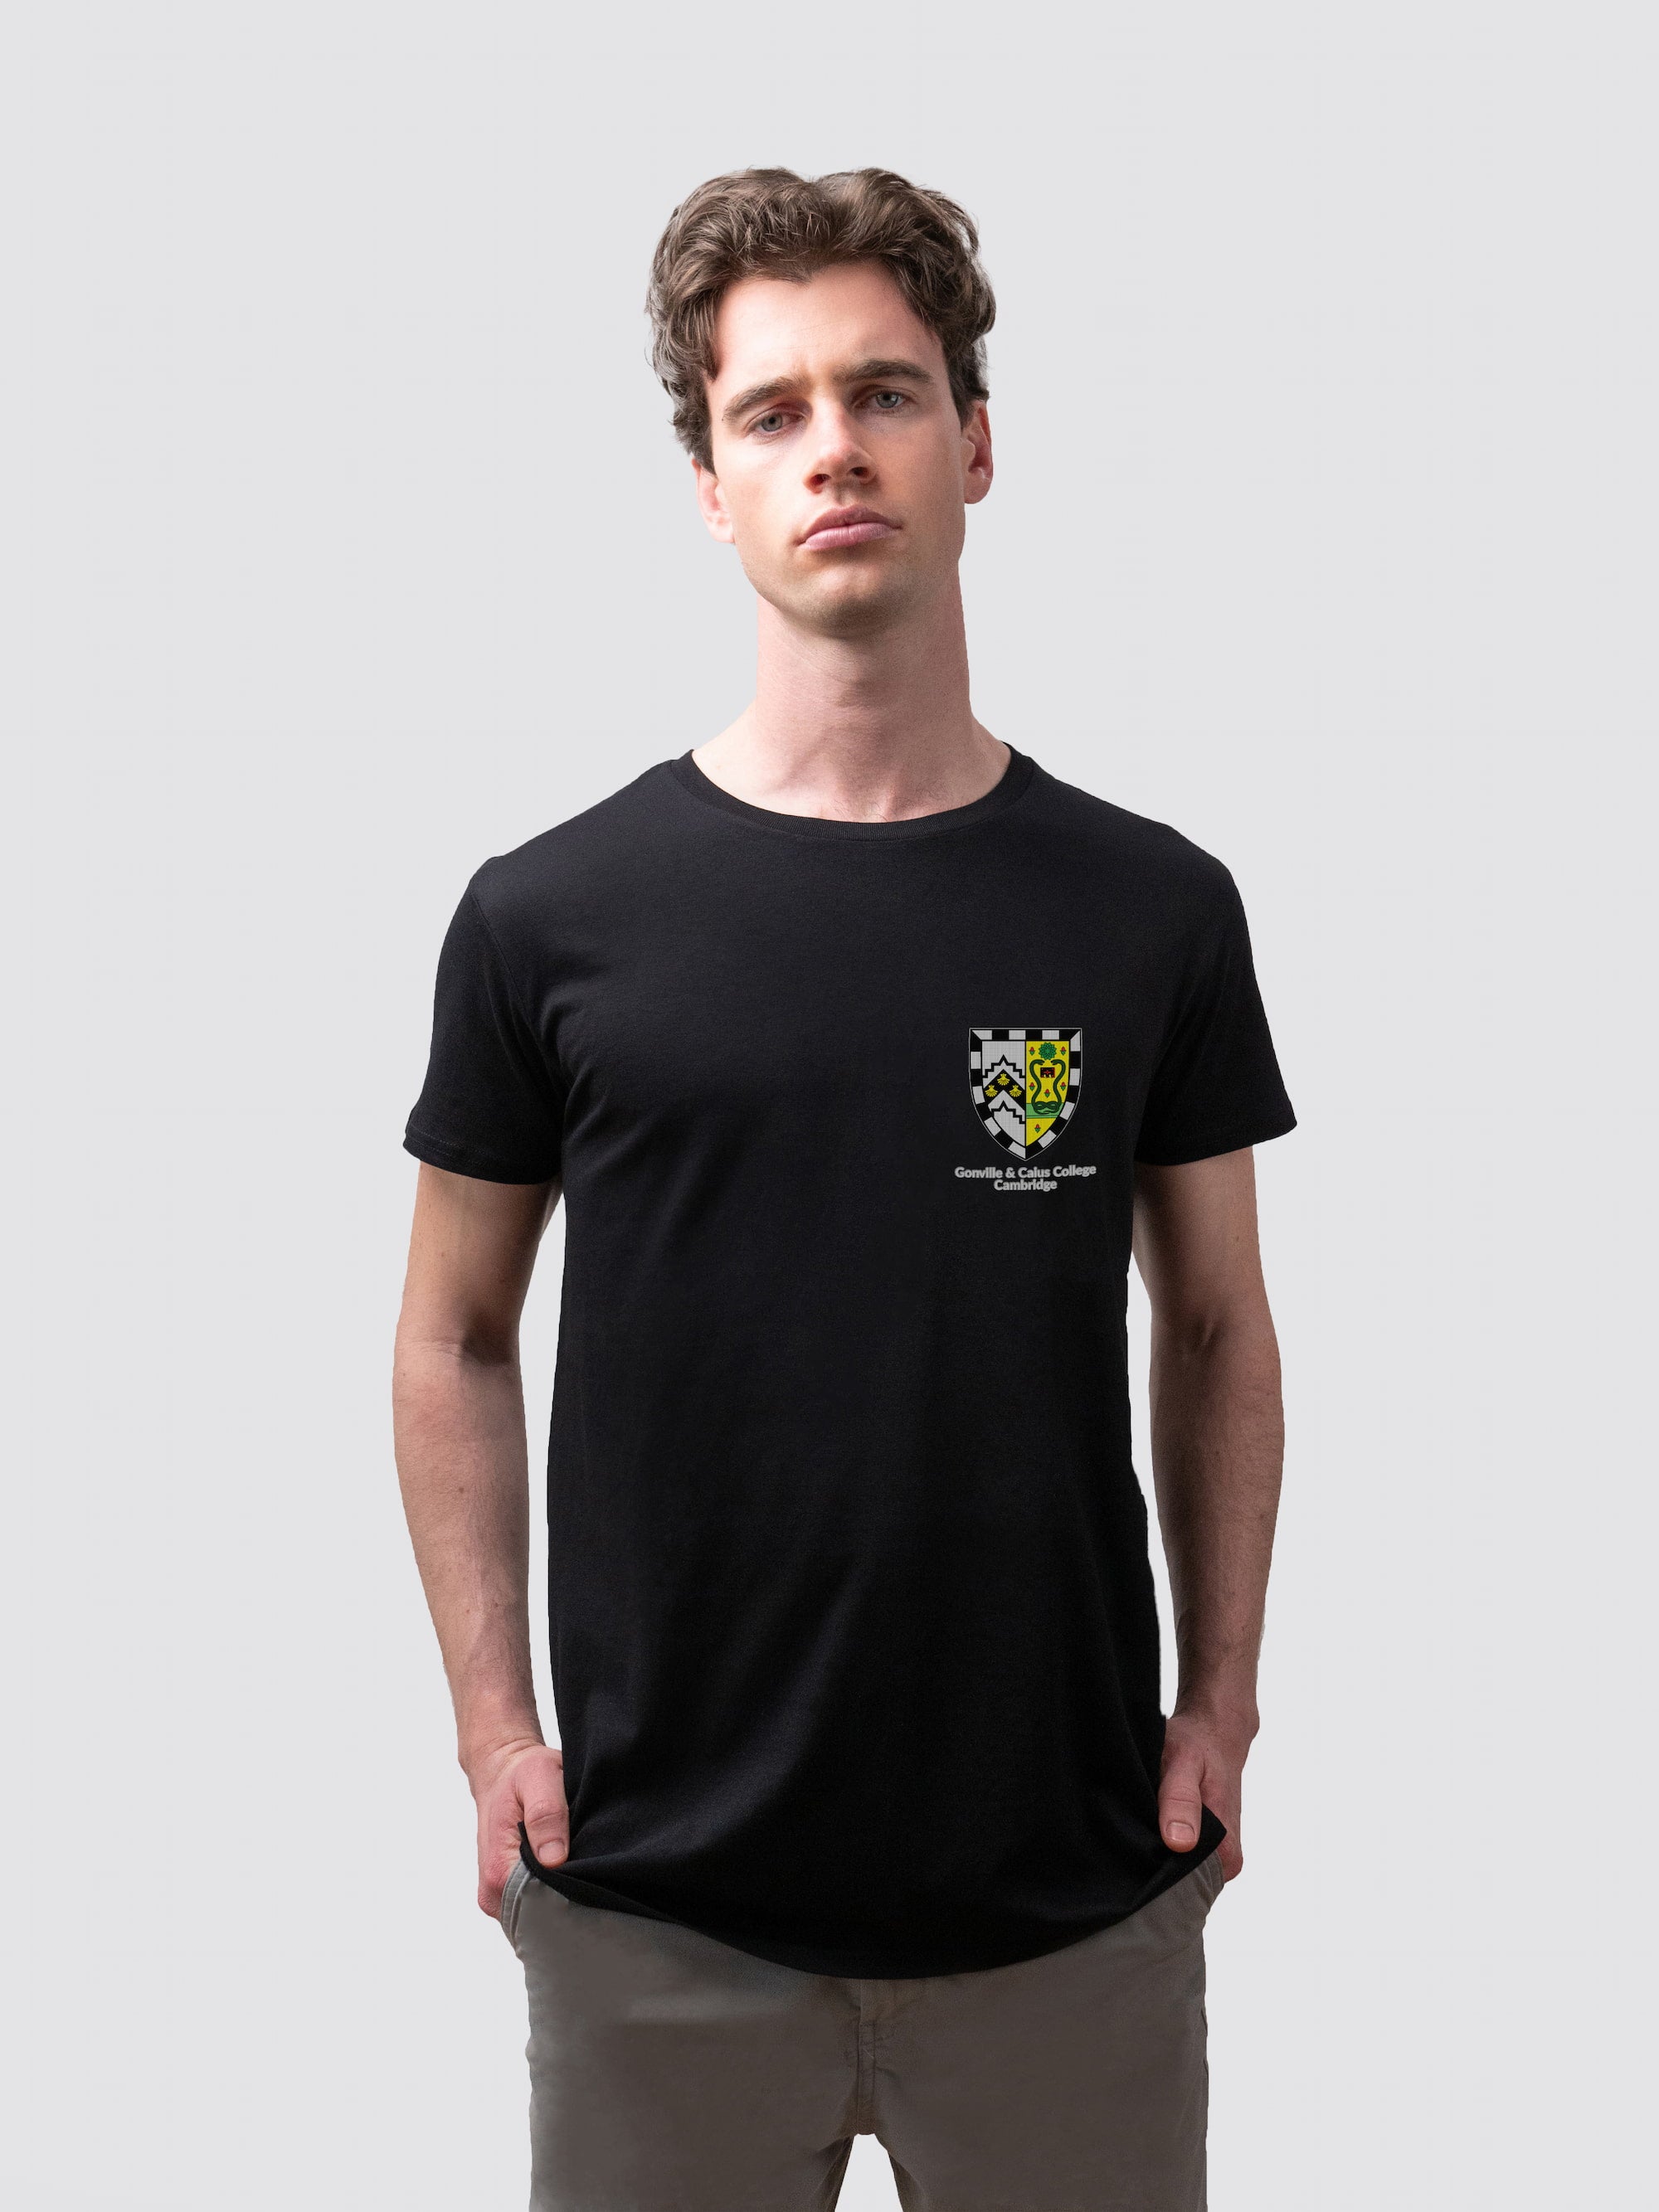 Sustainable Gonville & Caius t-shirt, made from organic cotton